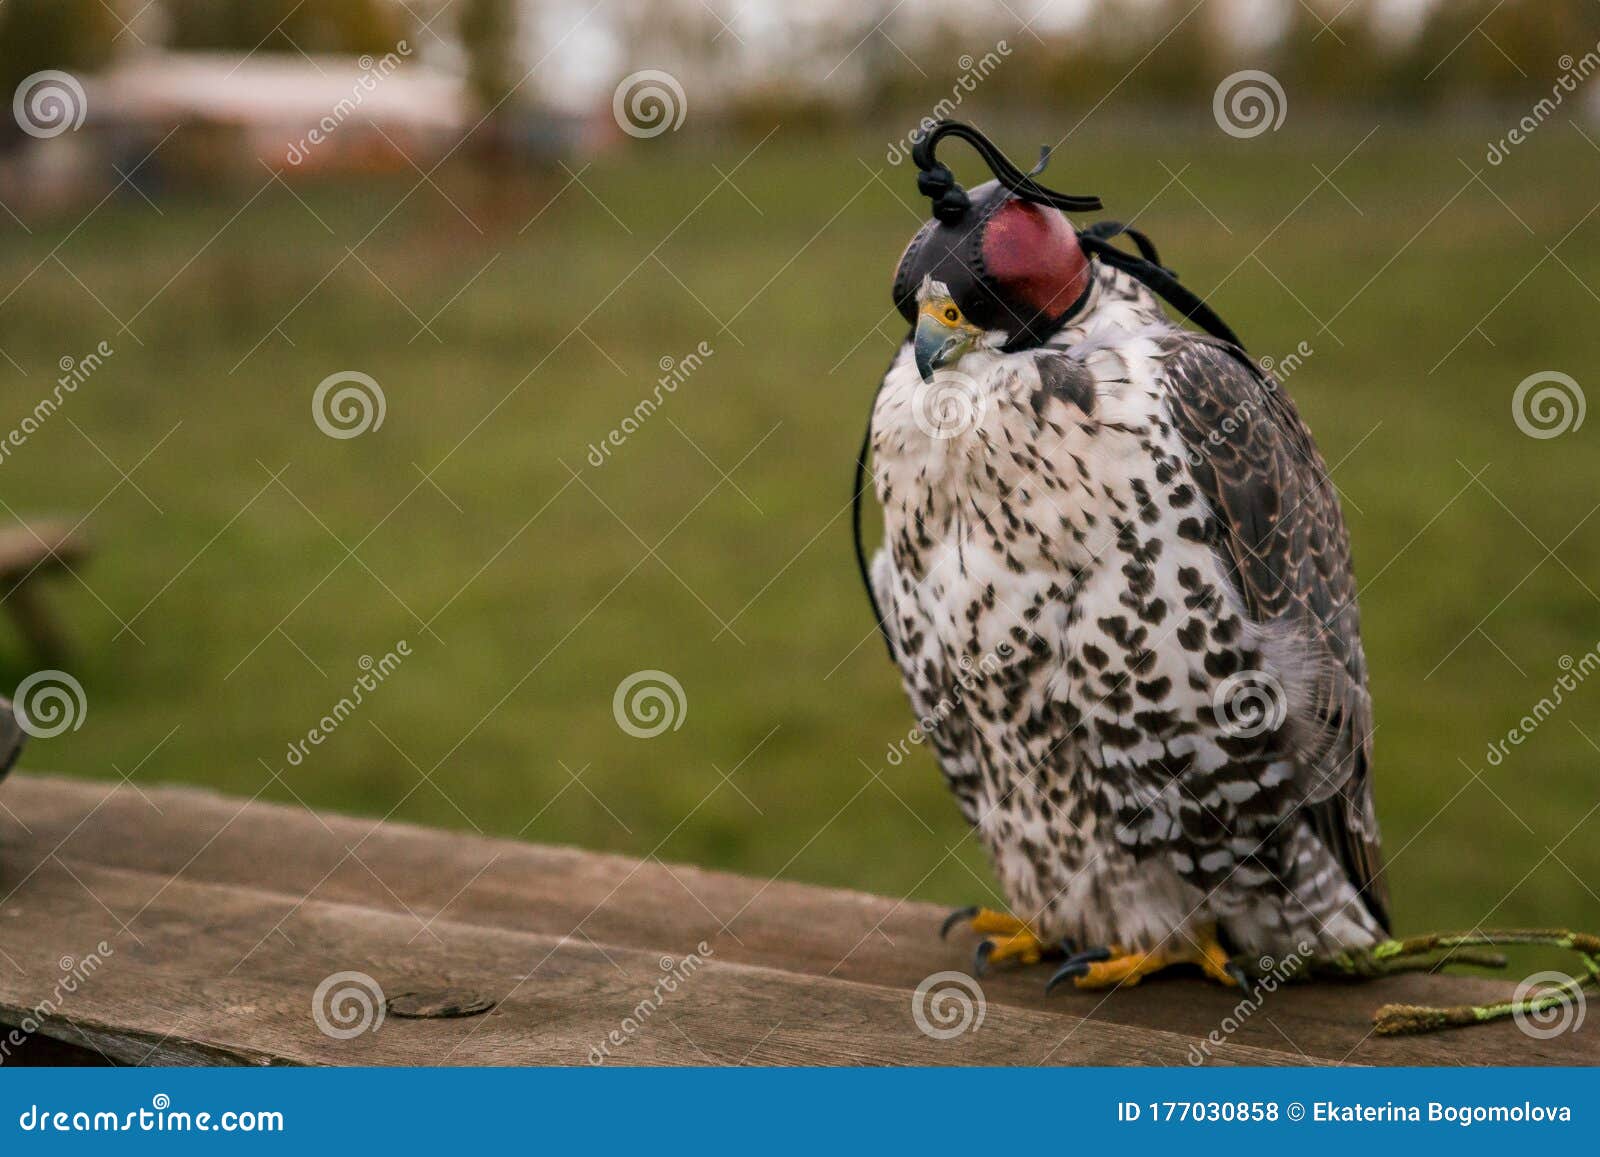 The Concept of Falconry. Head Cap, Hood Stock Photo - Image of smiling